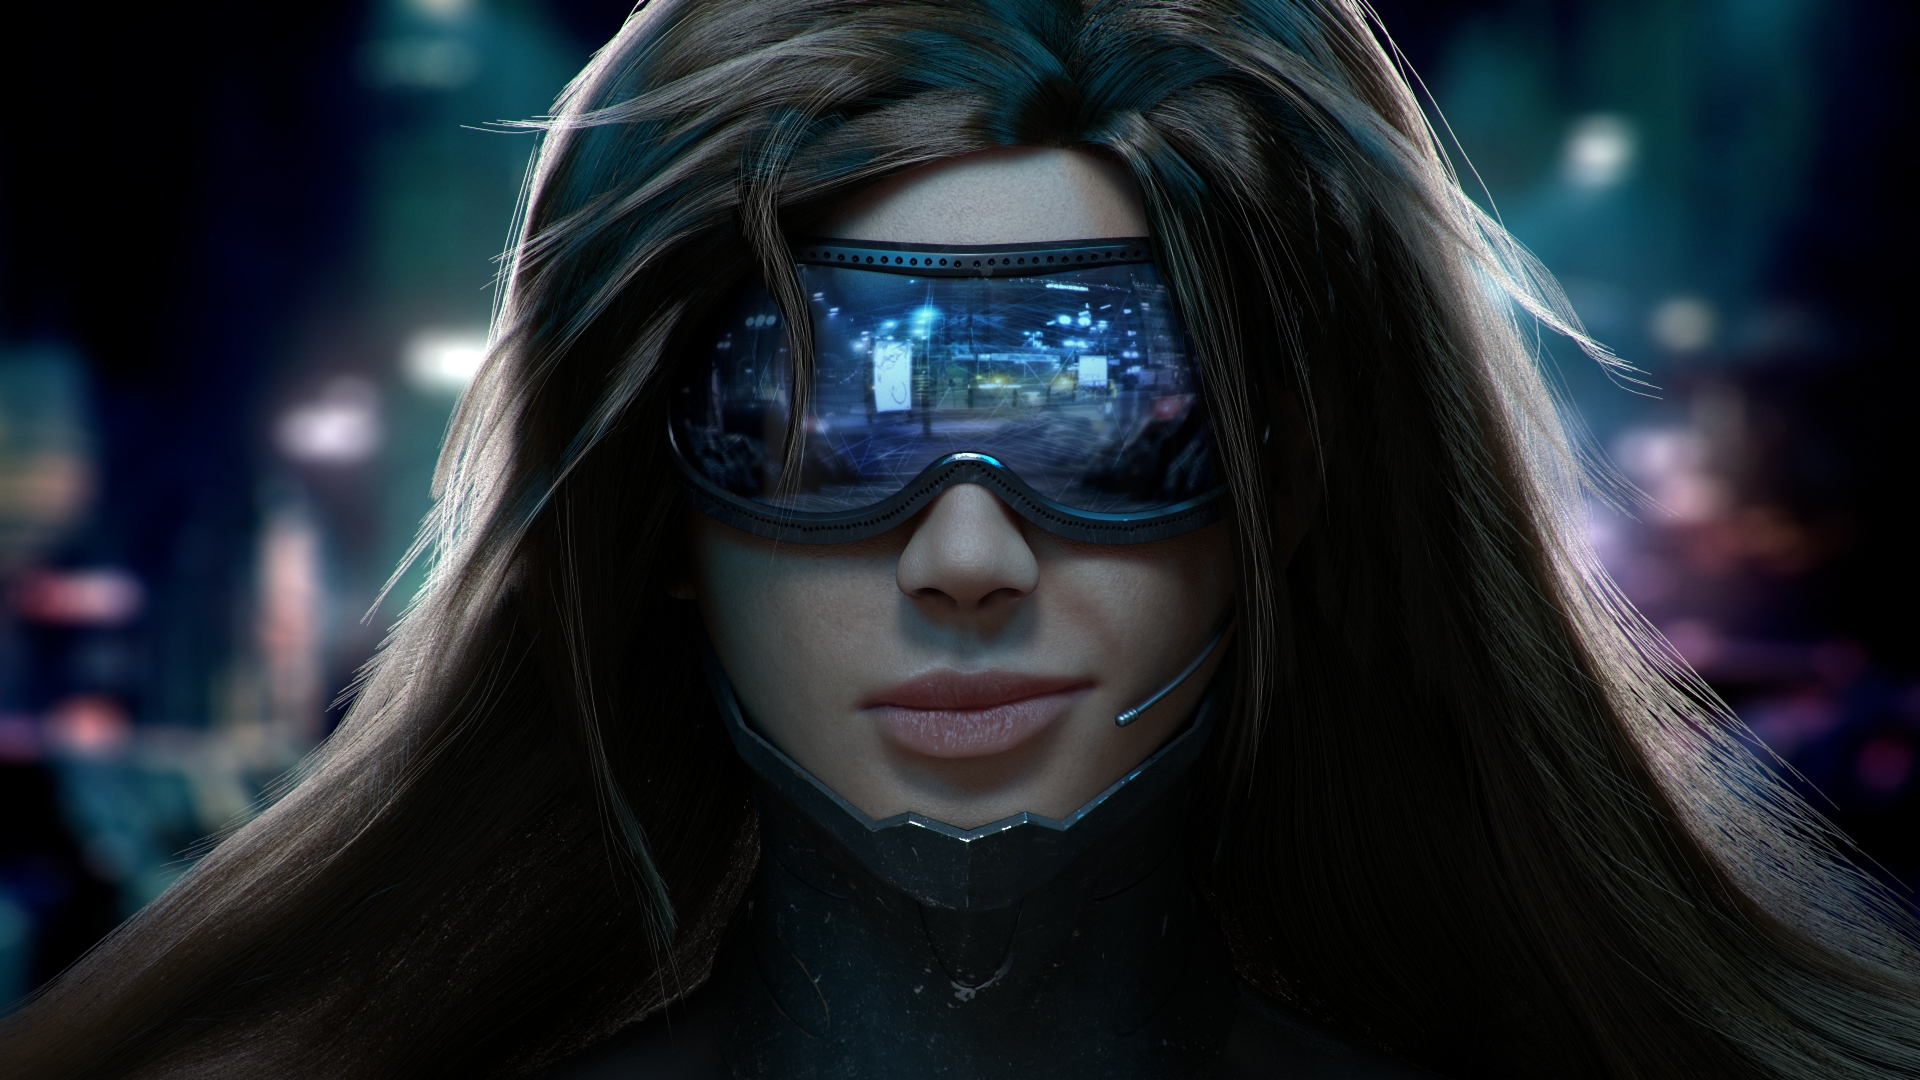 Cyber Girl Futuristic Look 2430 Wallpapers and Stock Photos 1920x1080